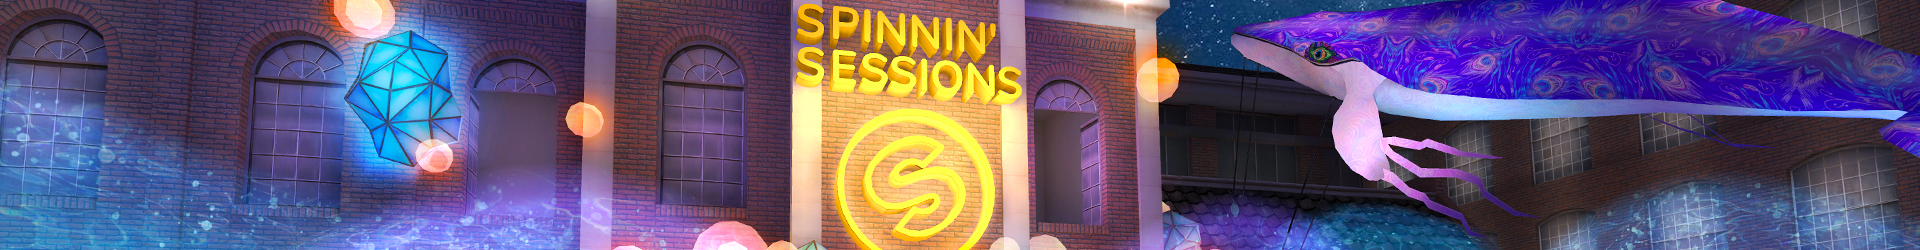 Avakin Life Players Ready To Dive Into A Deep-Sea Clubbing Experience with Spinnin' Records